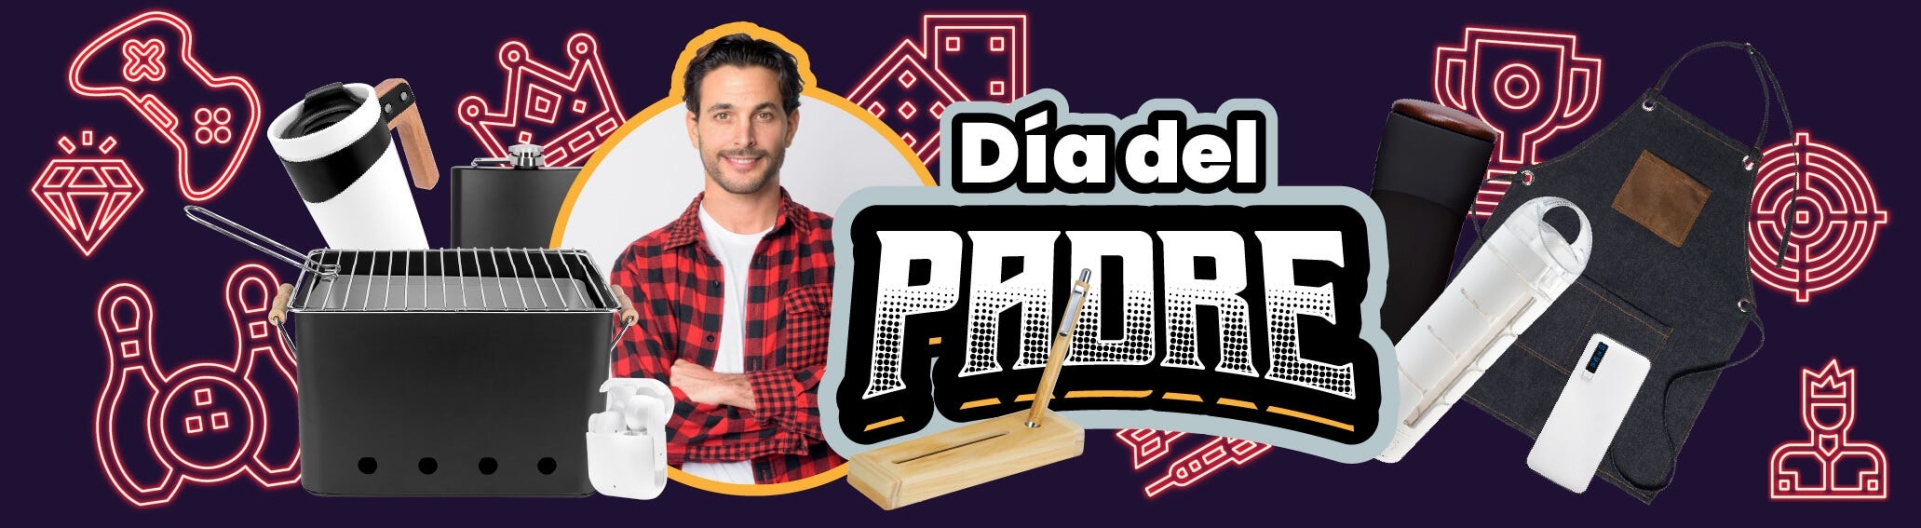 Padre mx Banner HOME 661d7427000a2